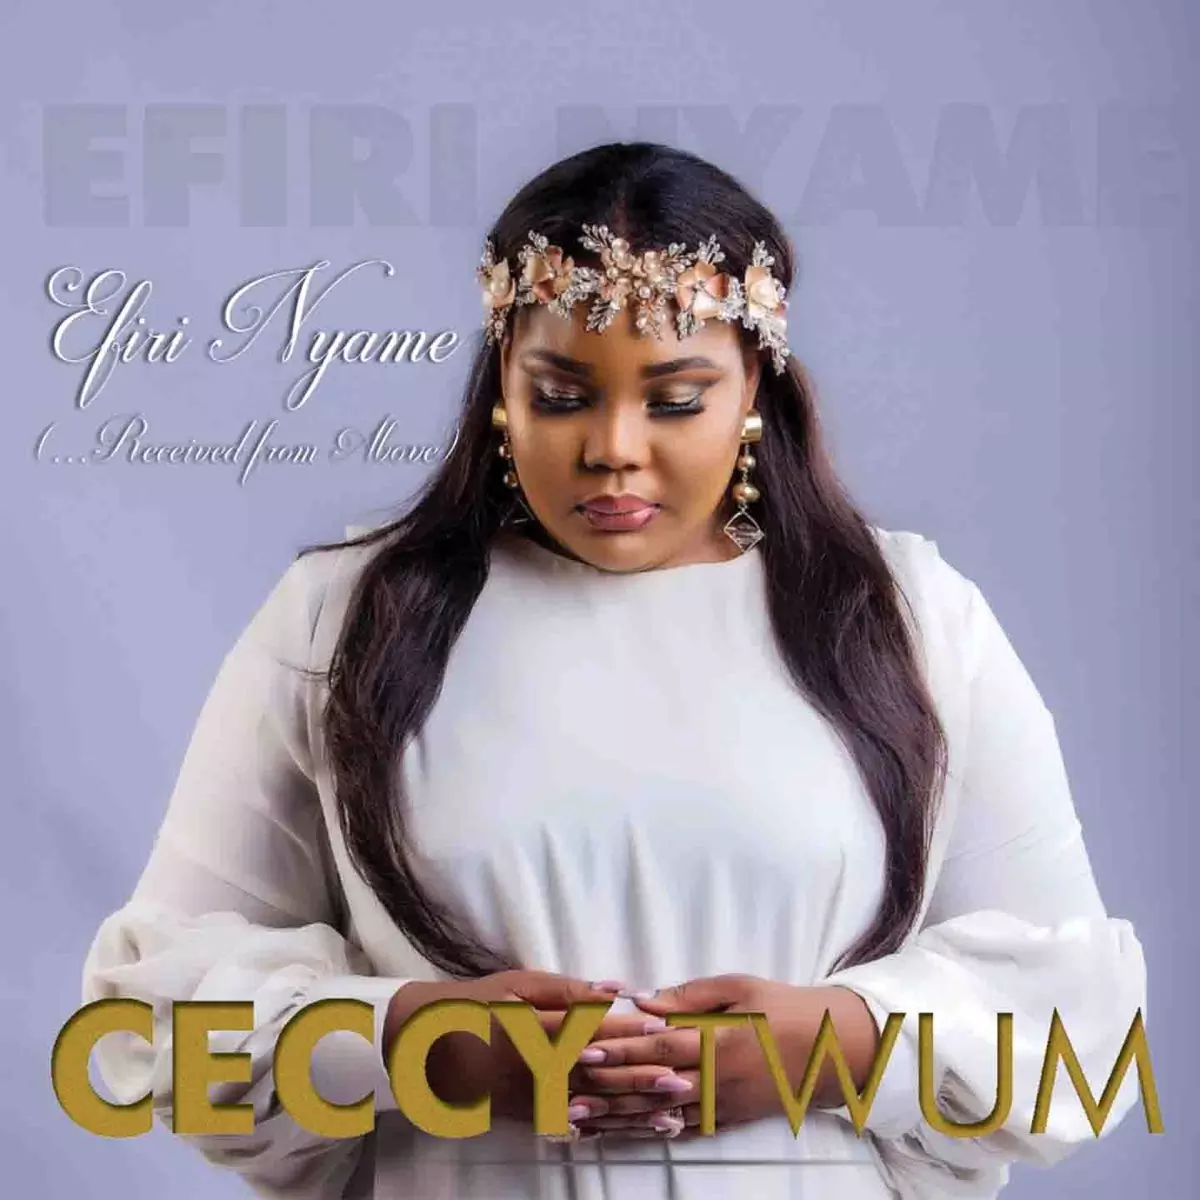 Efiri Nyame by Ceccy Twum on Apple Music